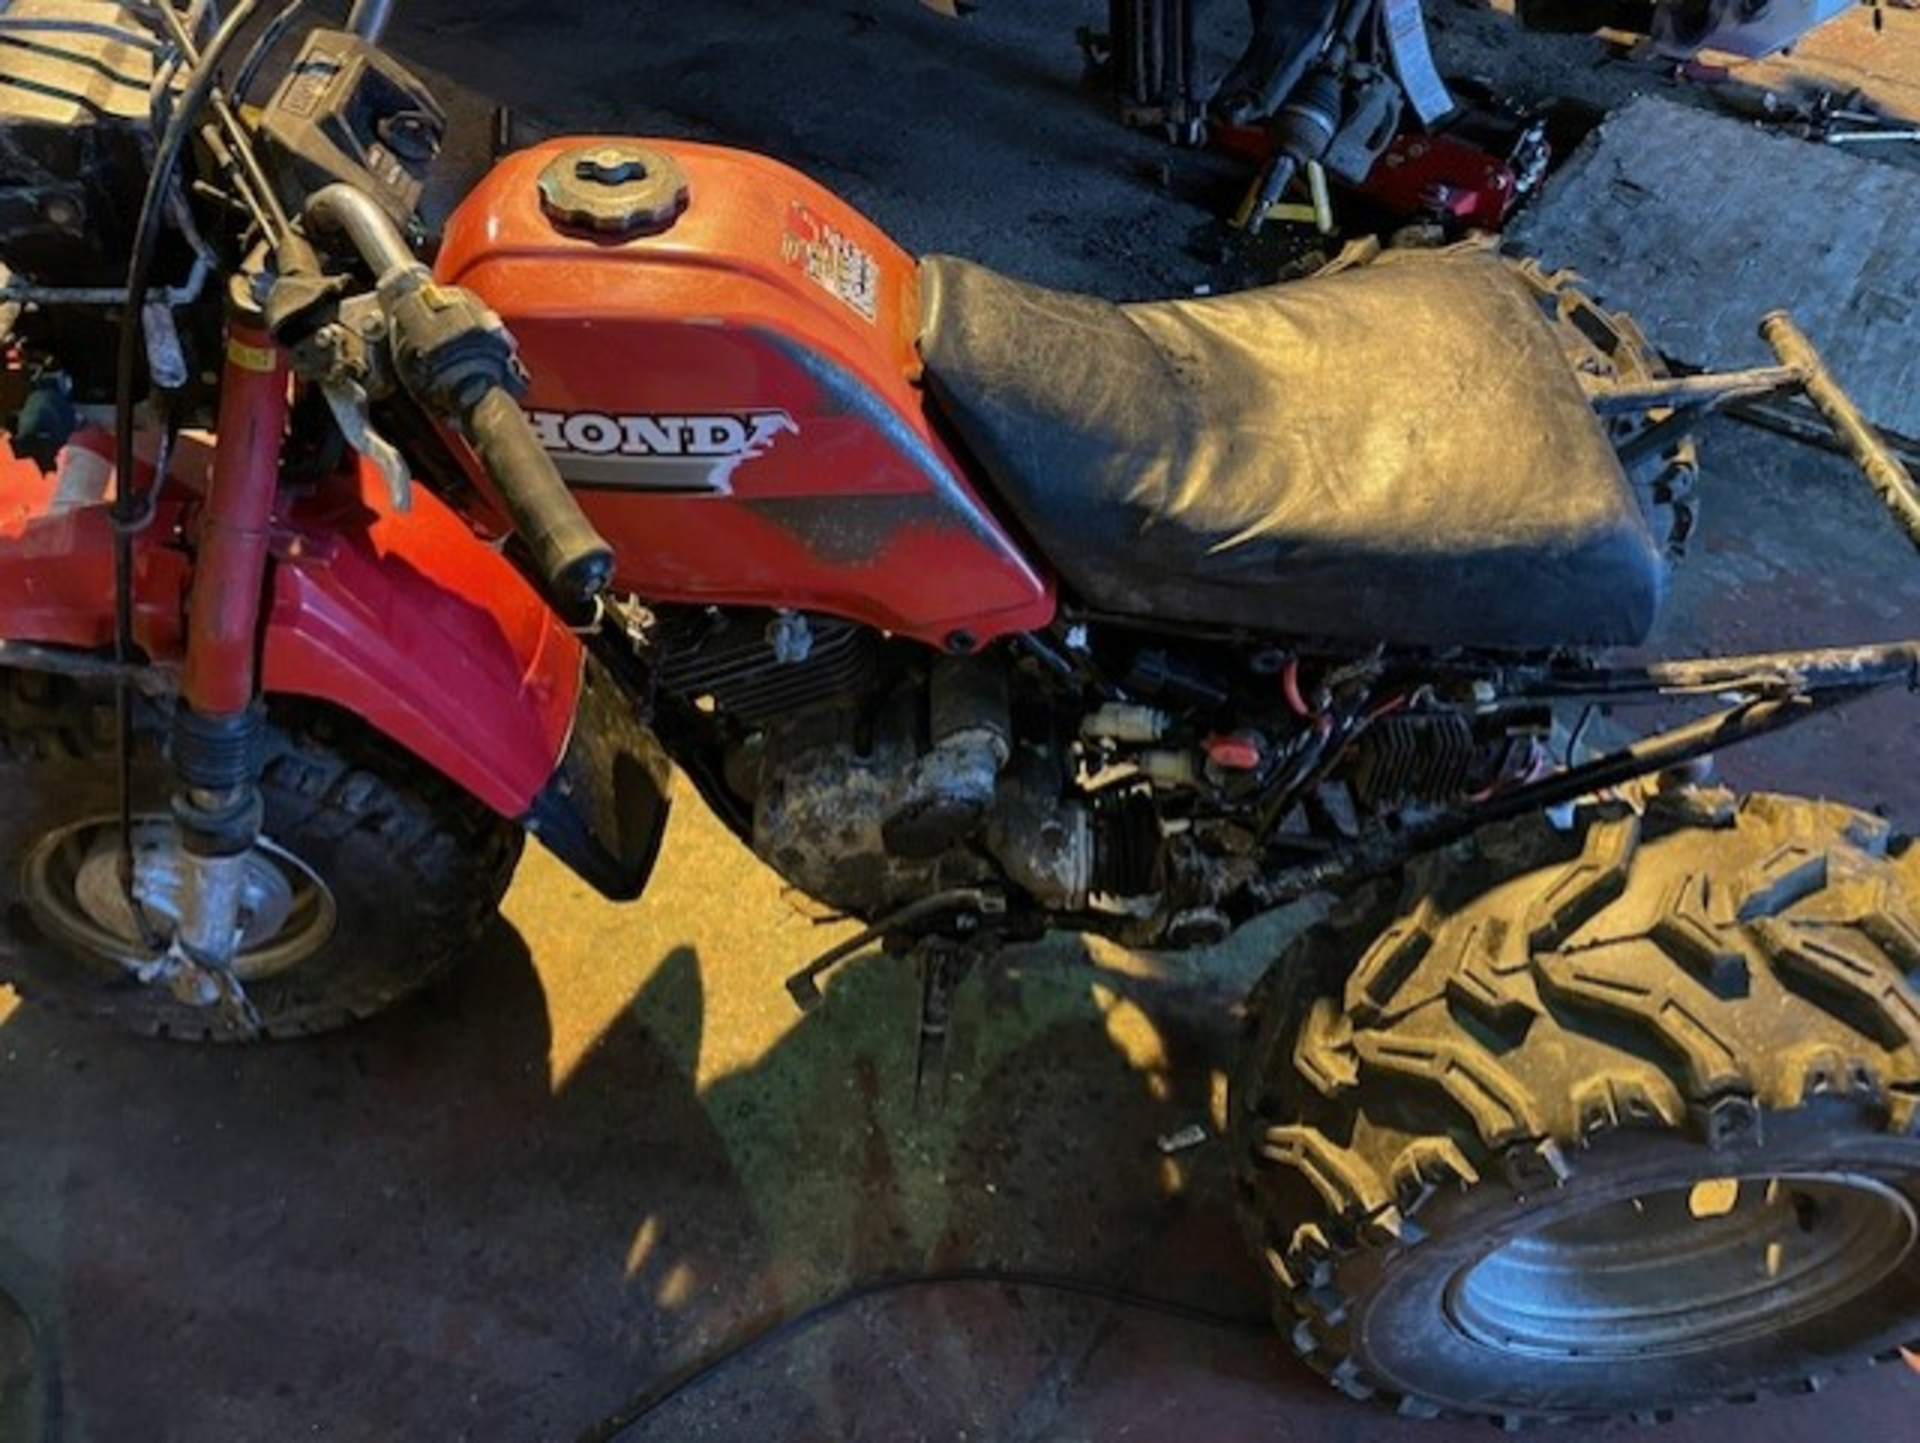 Honda big red 250 trike see video 1986 model back plastics are missing but has the carry tray new